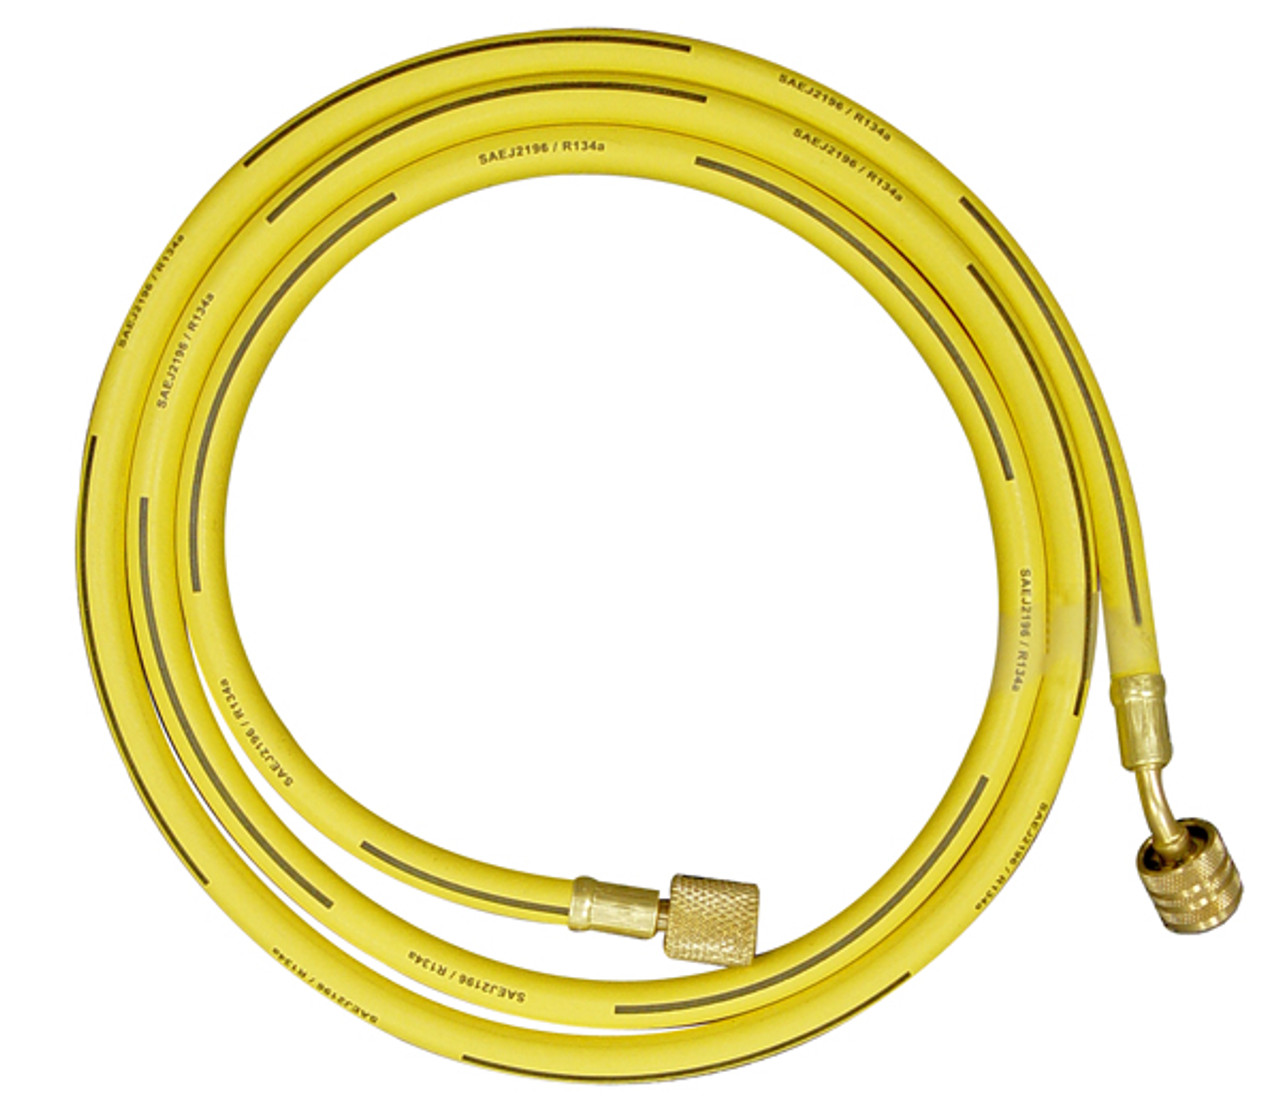 A/C Charging Hose, 63", Yellow